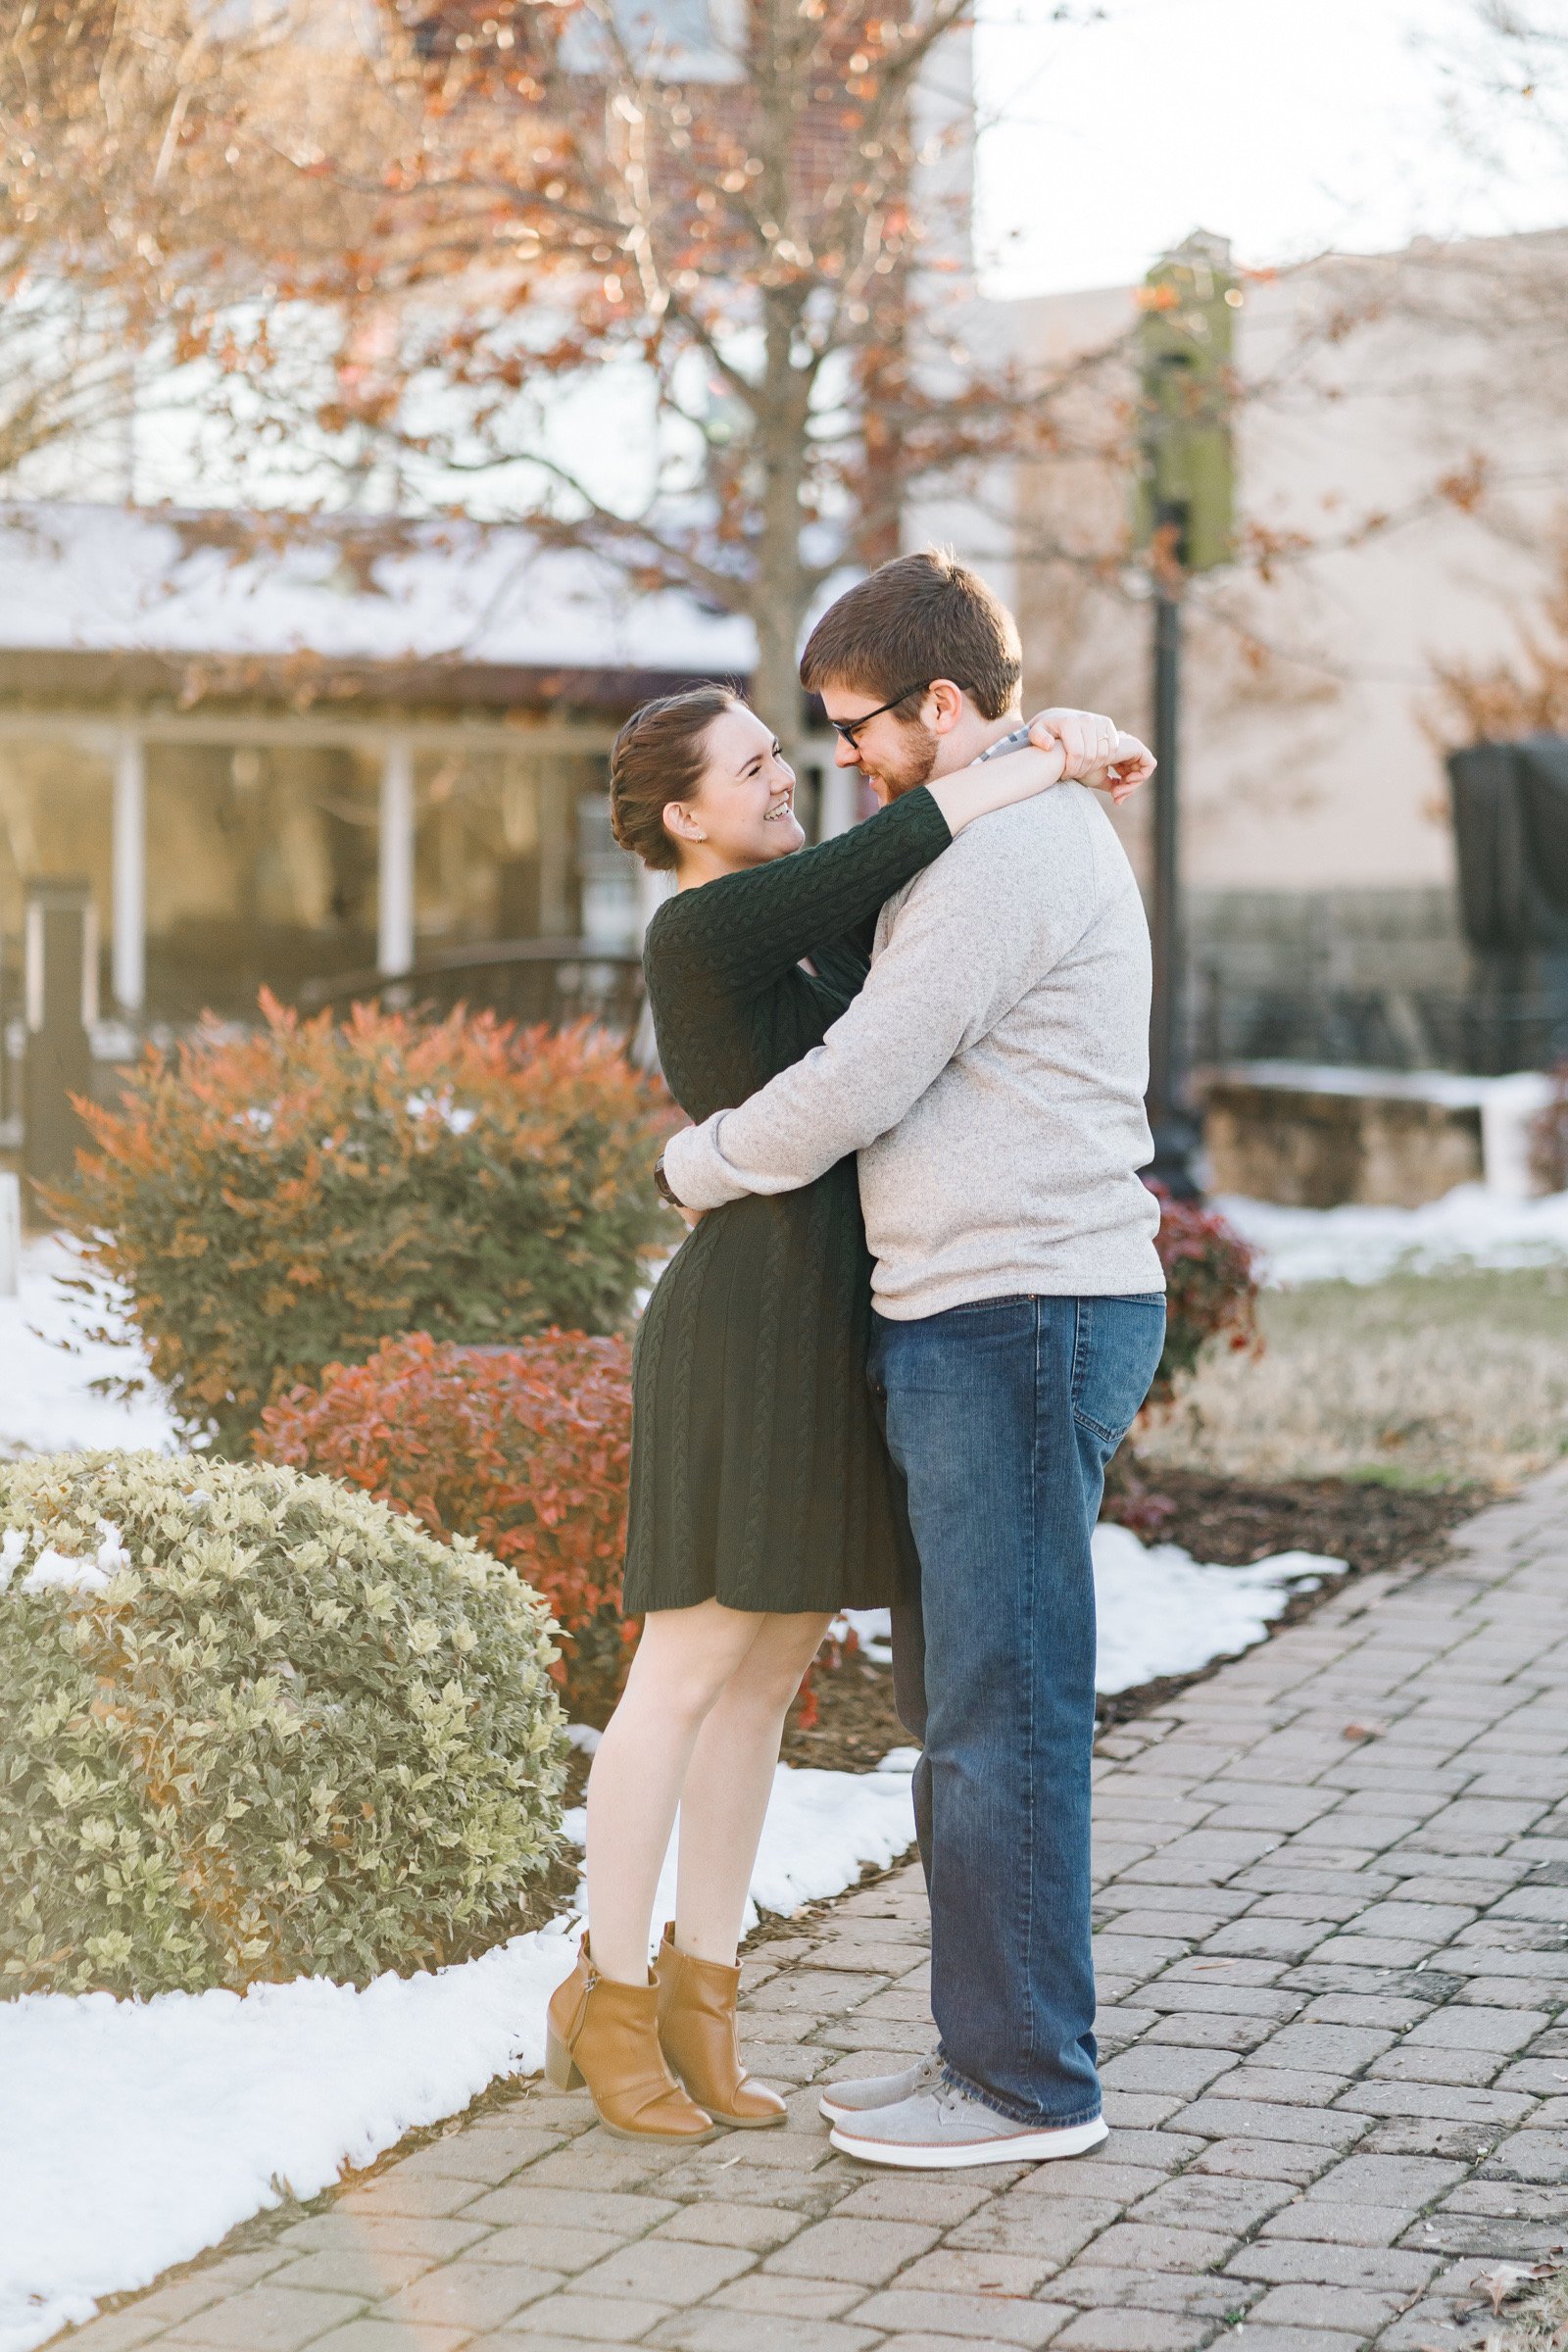 jameson-anna-engagement-session-downtown-danville-river-district-virginia-by-jonathan-hannah-photography-2.jpg